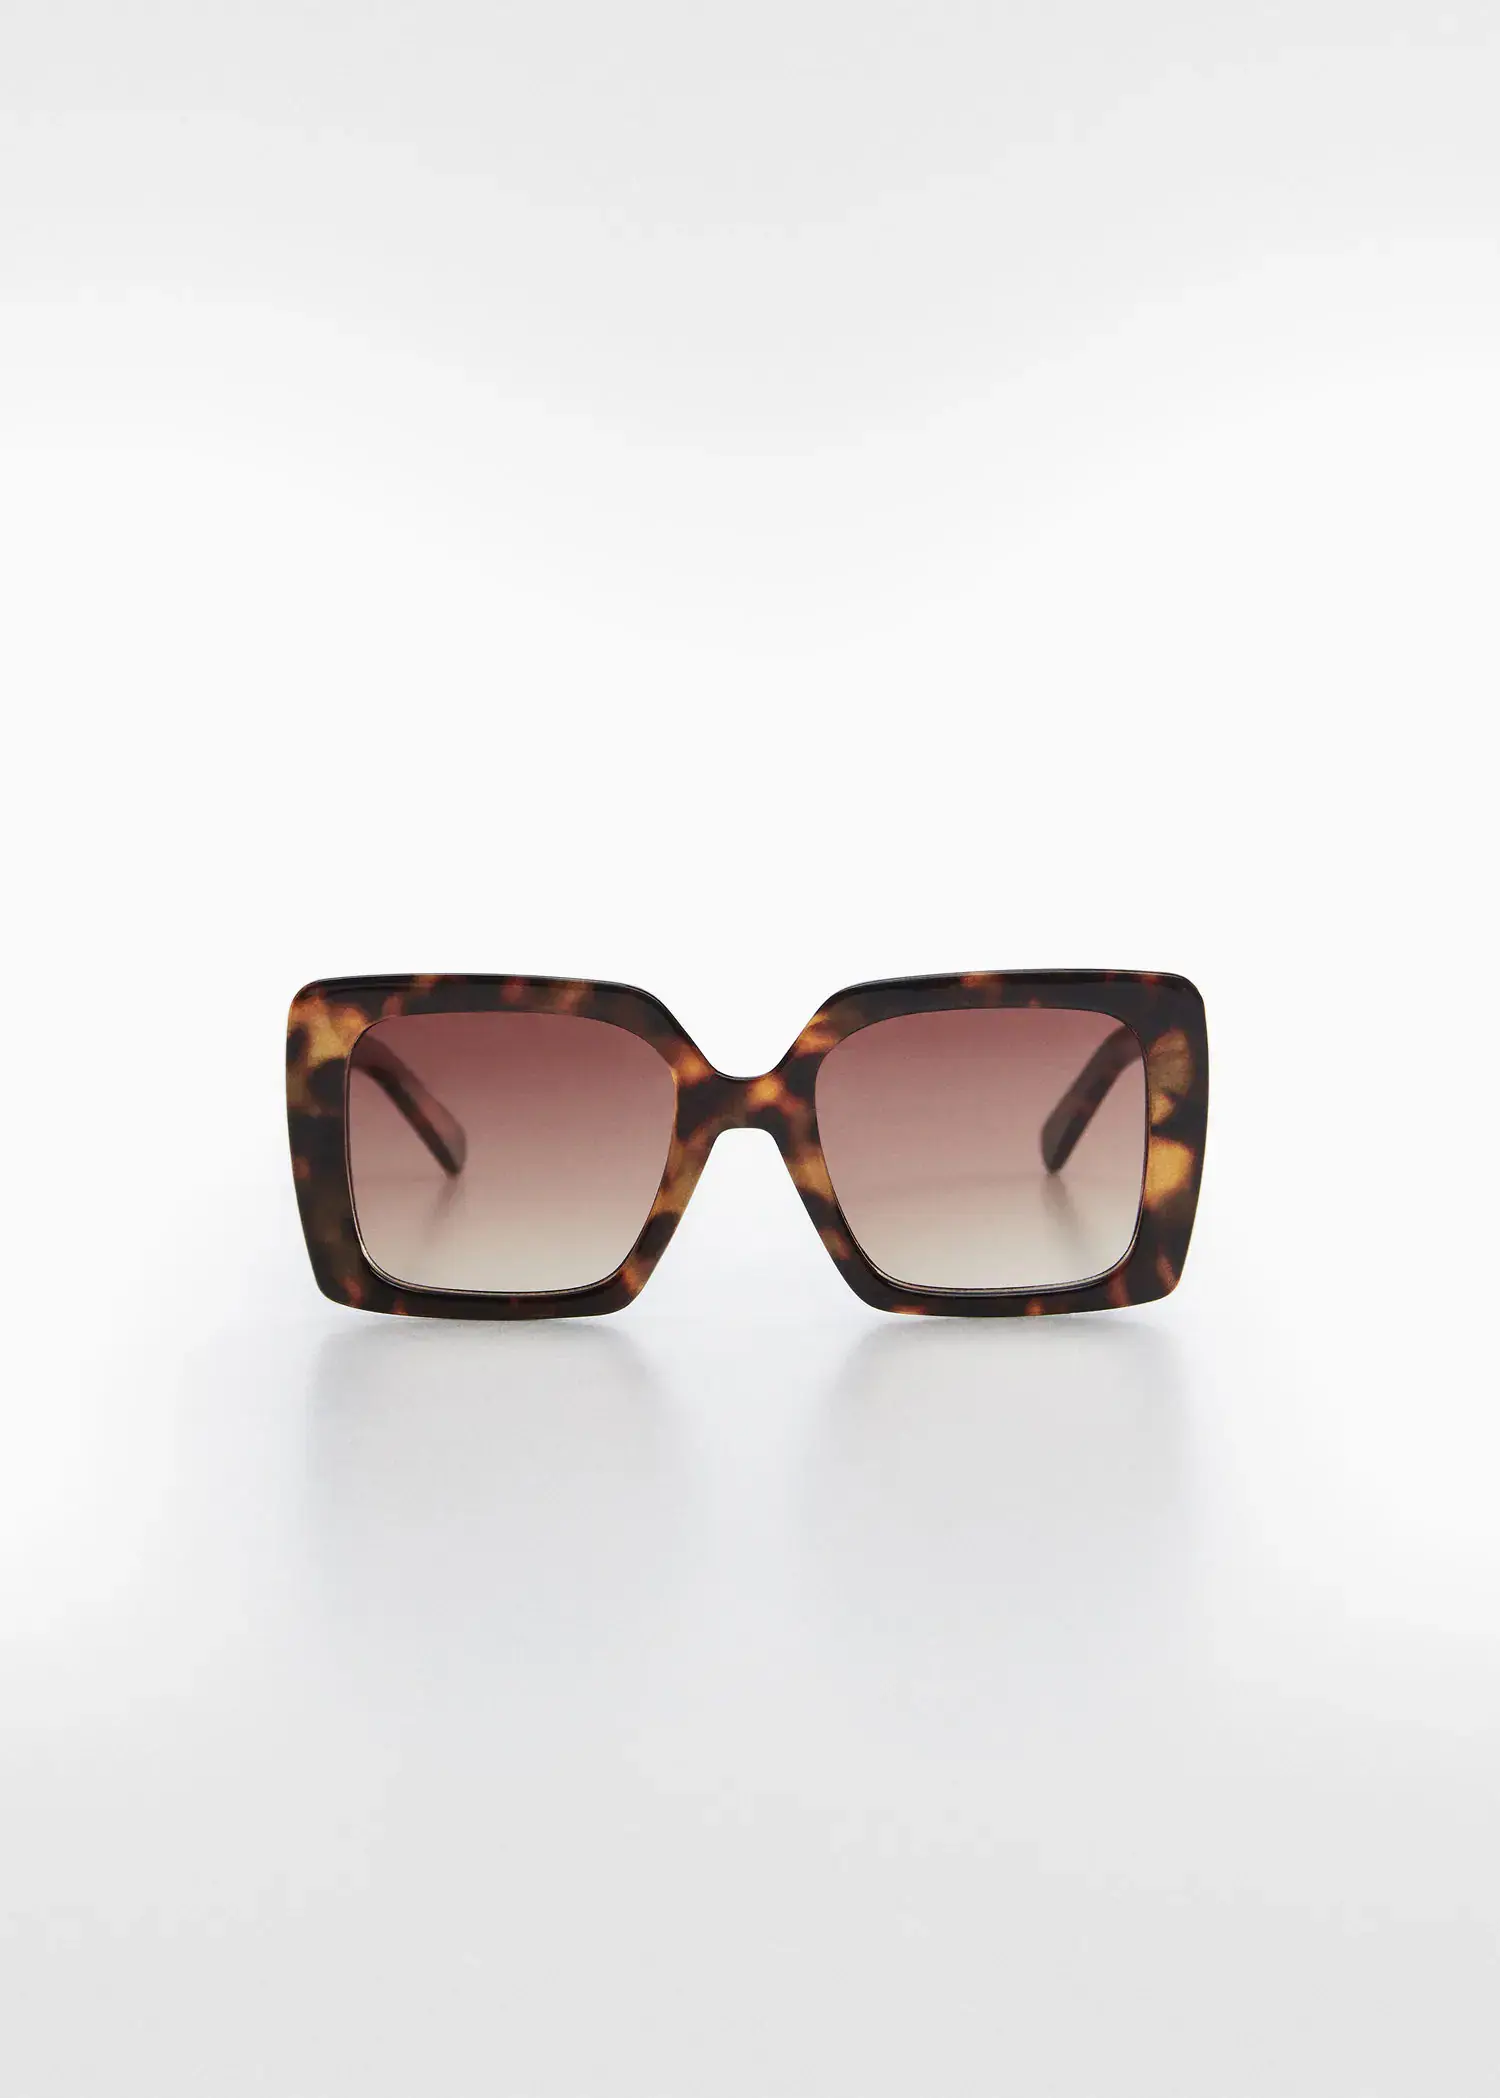 Mango Tortoiseshell square sunglasses. a pair of sunglasses sitting on top of a white table. 